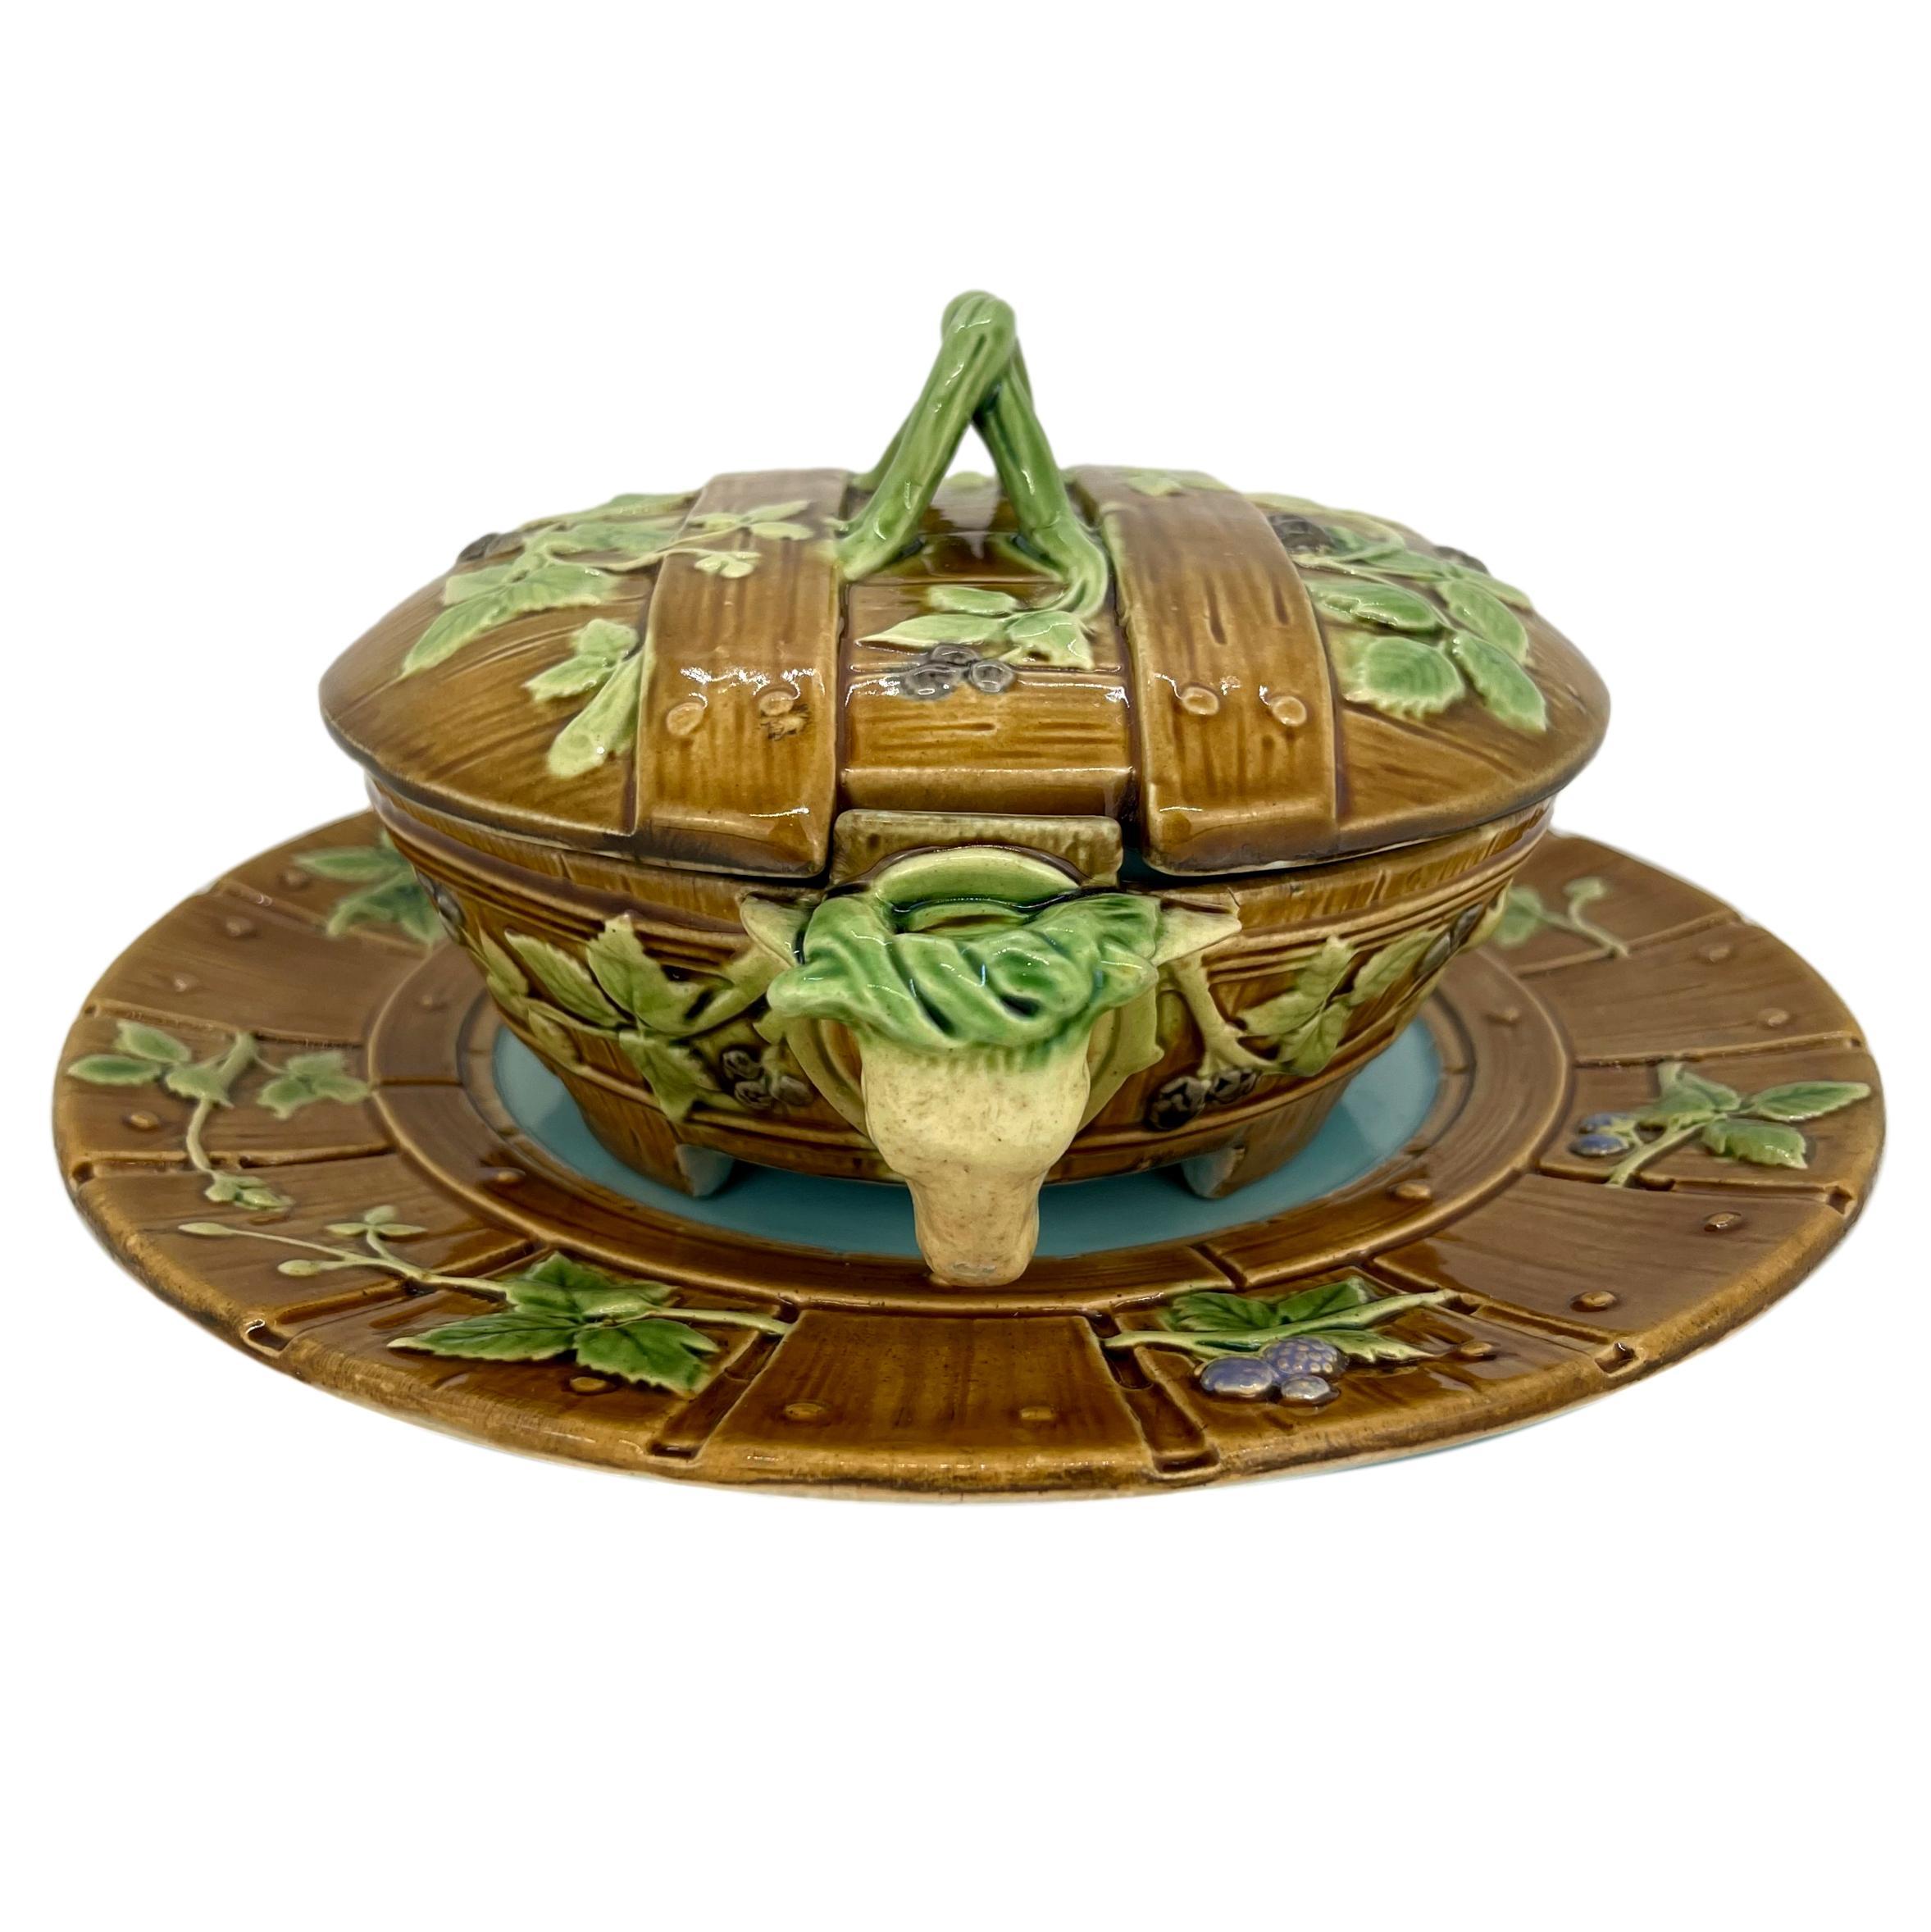 Minton Majolica butter dish, Lid, and Underplate, molded as wooden staves with blackberries and vines with cow's heads wearing green glazed garlands as handles, the reverse of the dish with impressed marks: 'MINTON,' and Minton date cypher for 1867,